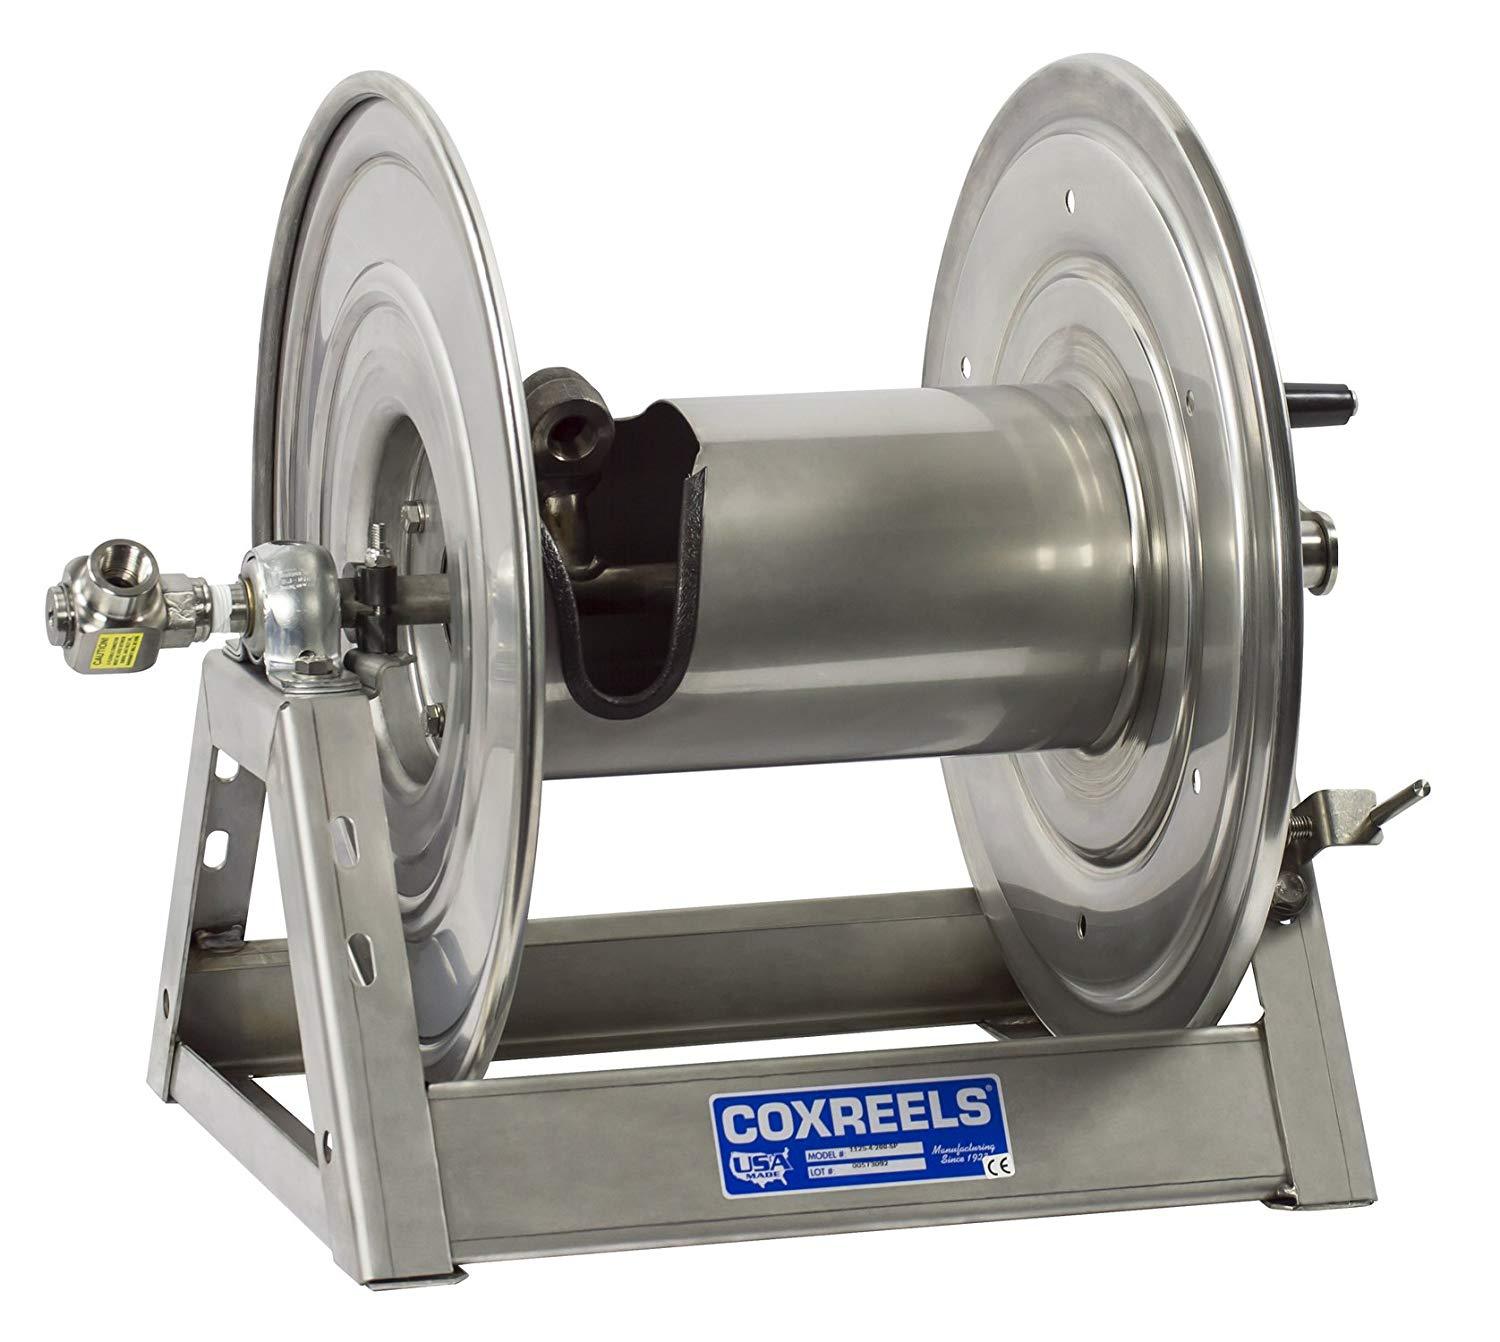 1125-4-200-SP : Coxreels 1125-4-200-SP Stainless Steel Hand Crank Hose Reel, 1/2" ID, 200' capacity, NO HOSE, 3000psi